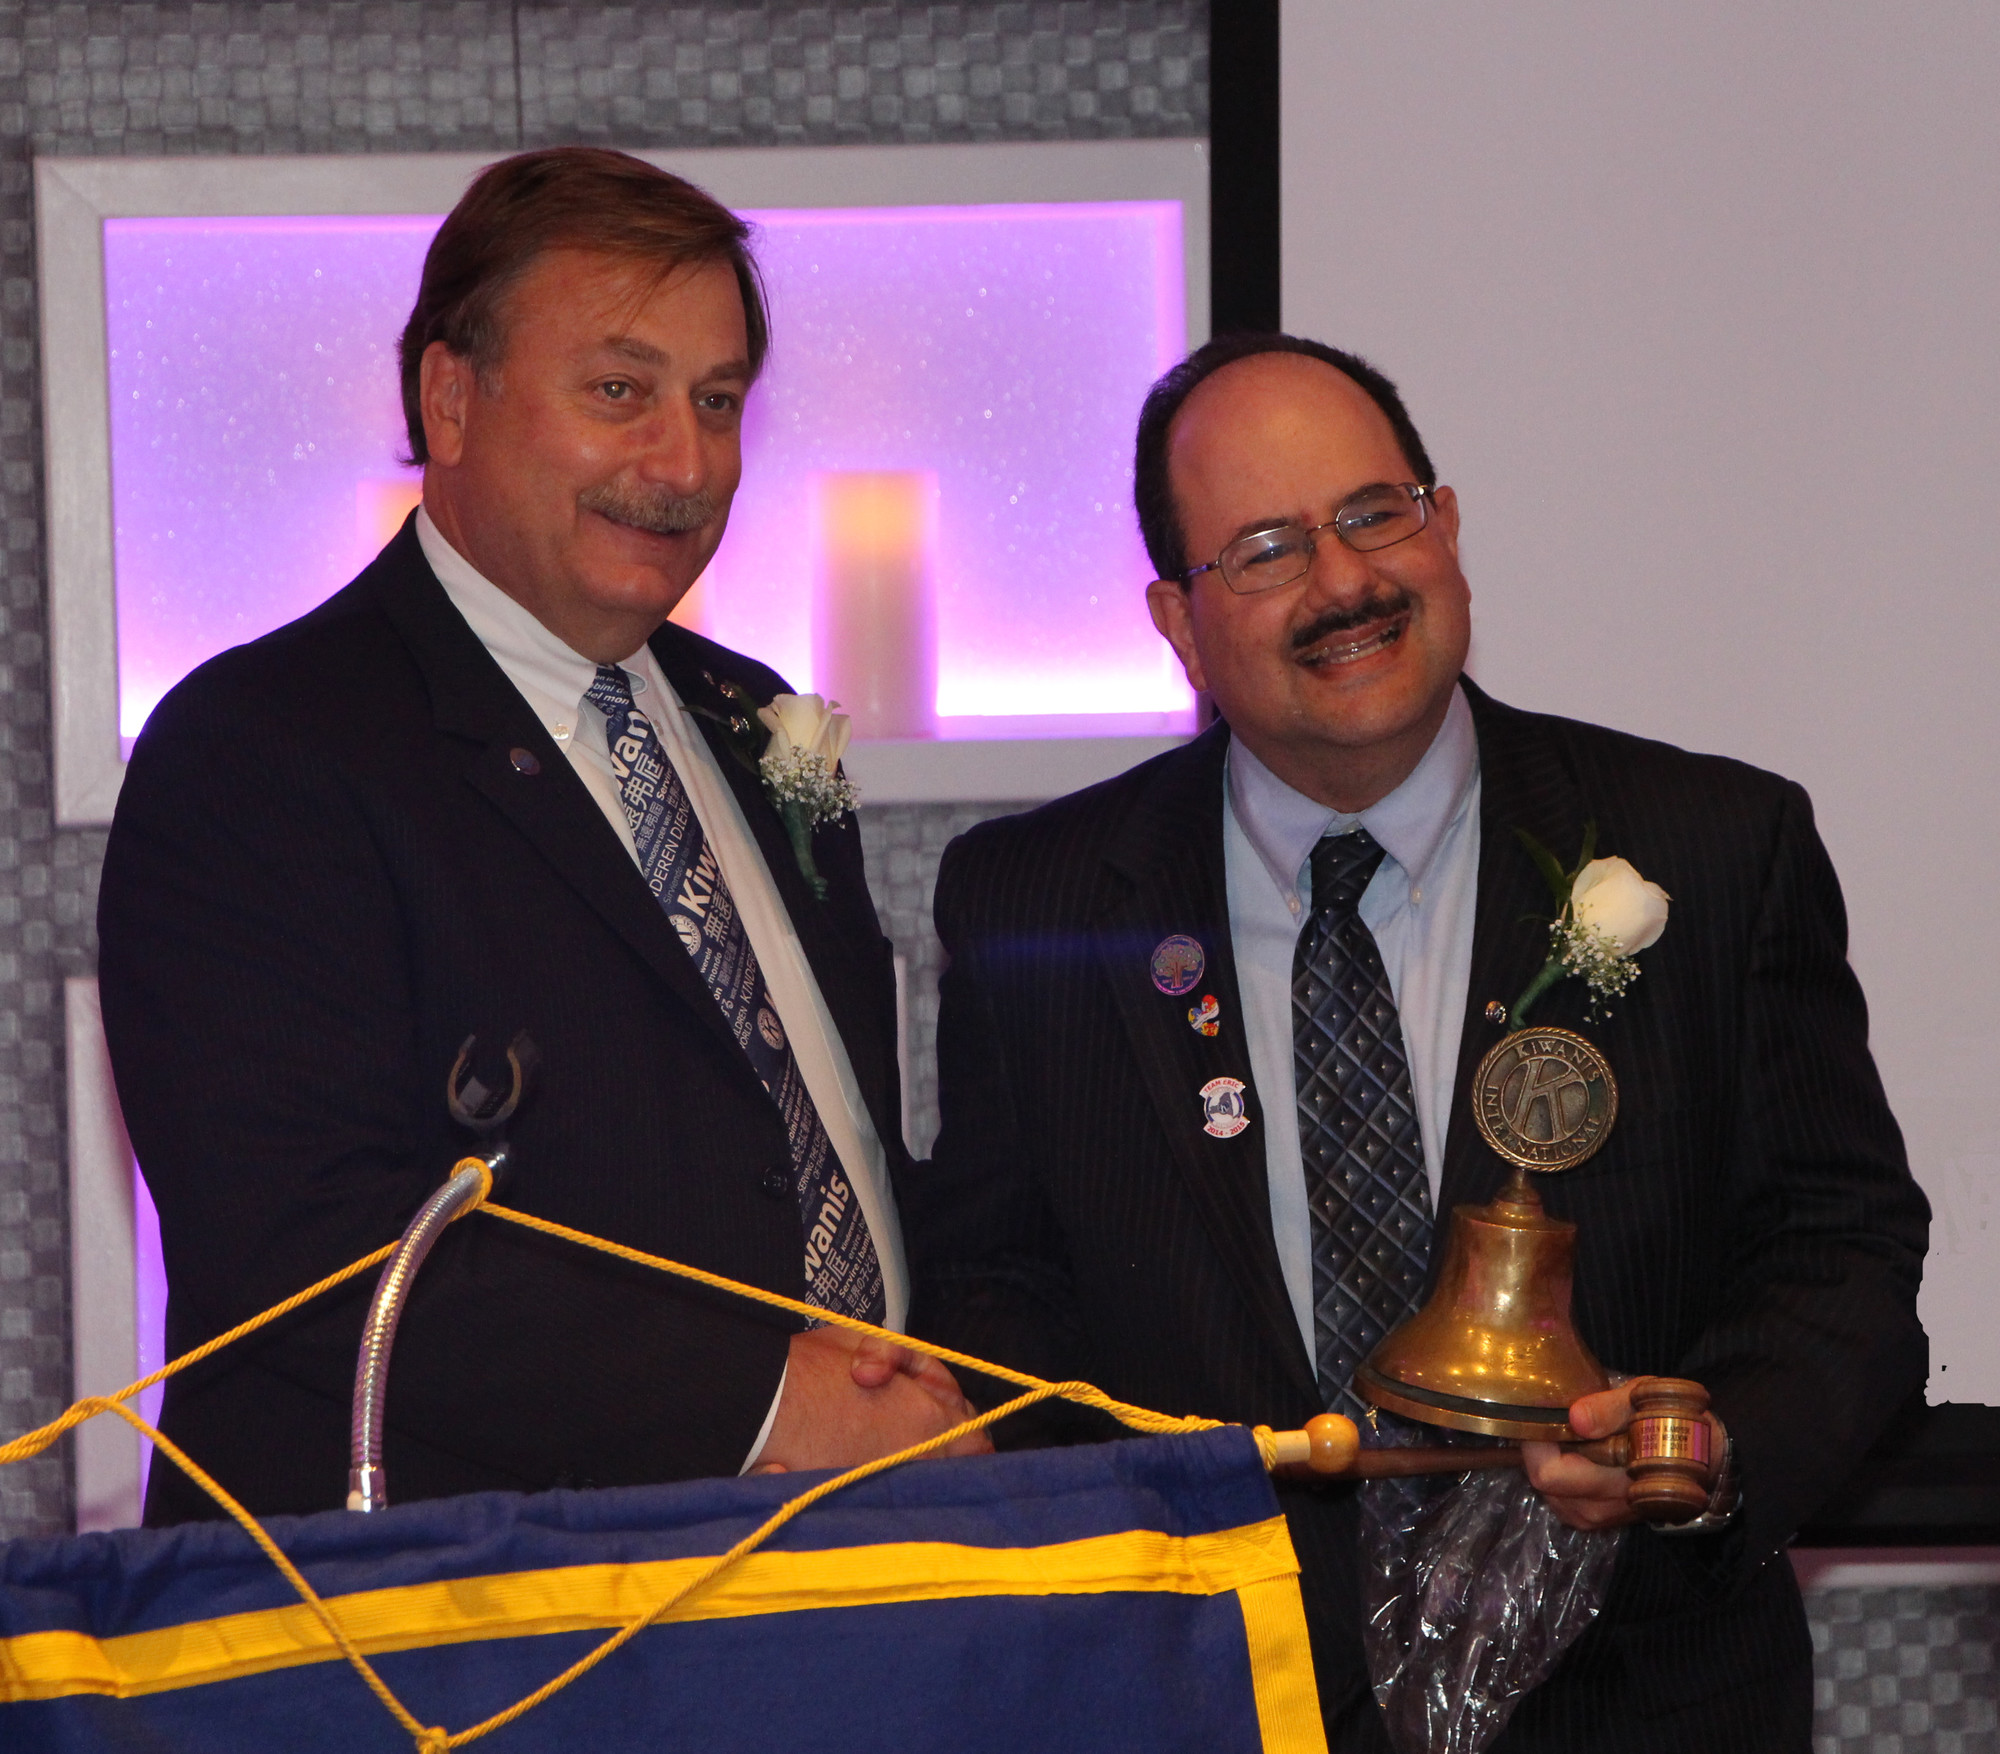 James Smith, left, the outgoing Kiwanis president, gave words of encouragement to new president Kevin Kamper, before handing him his official Kiwanis bell and hammer.